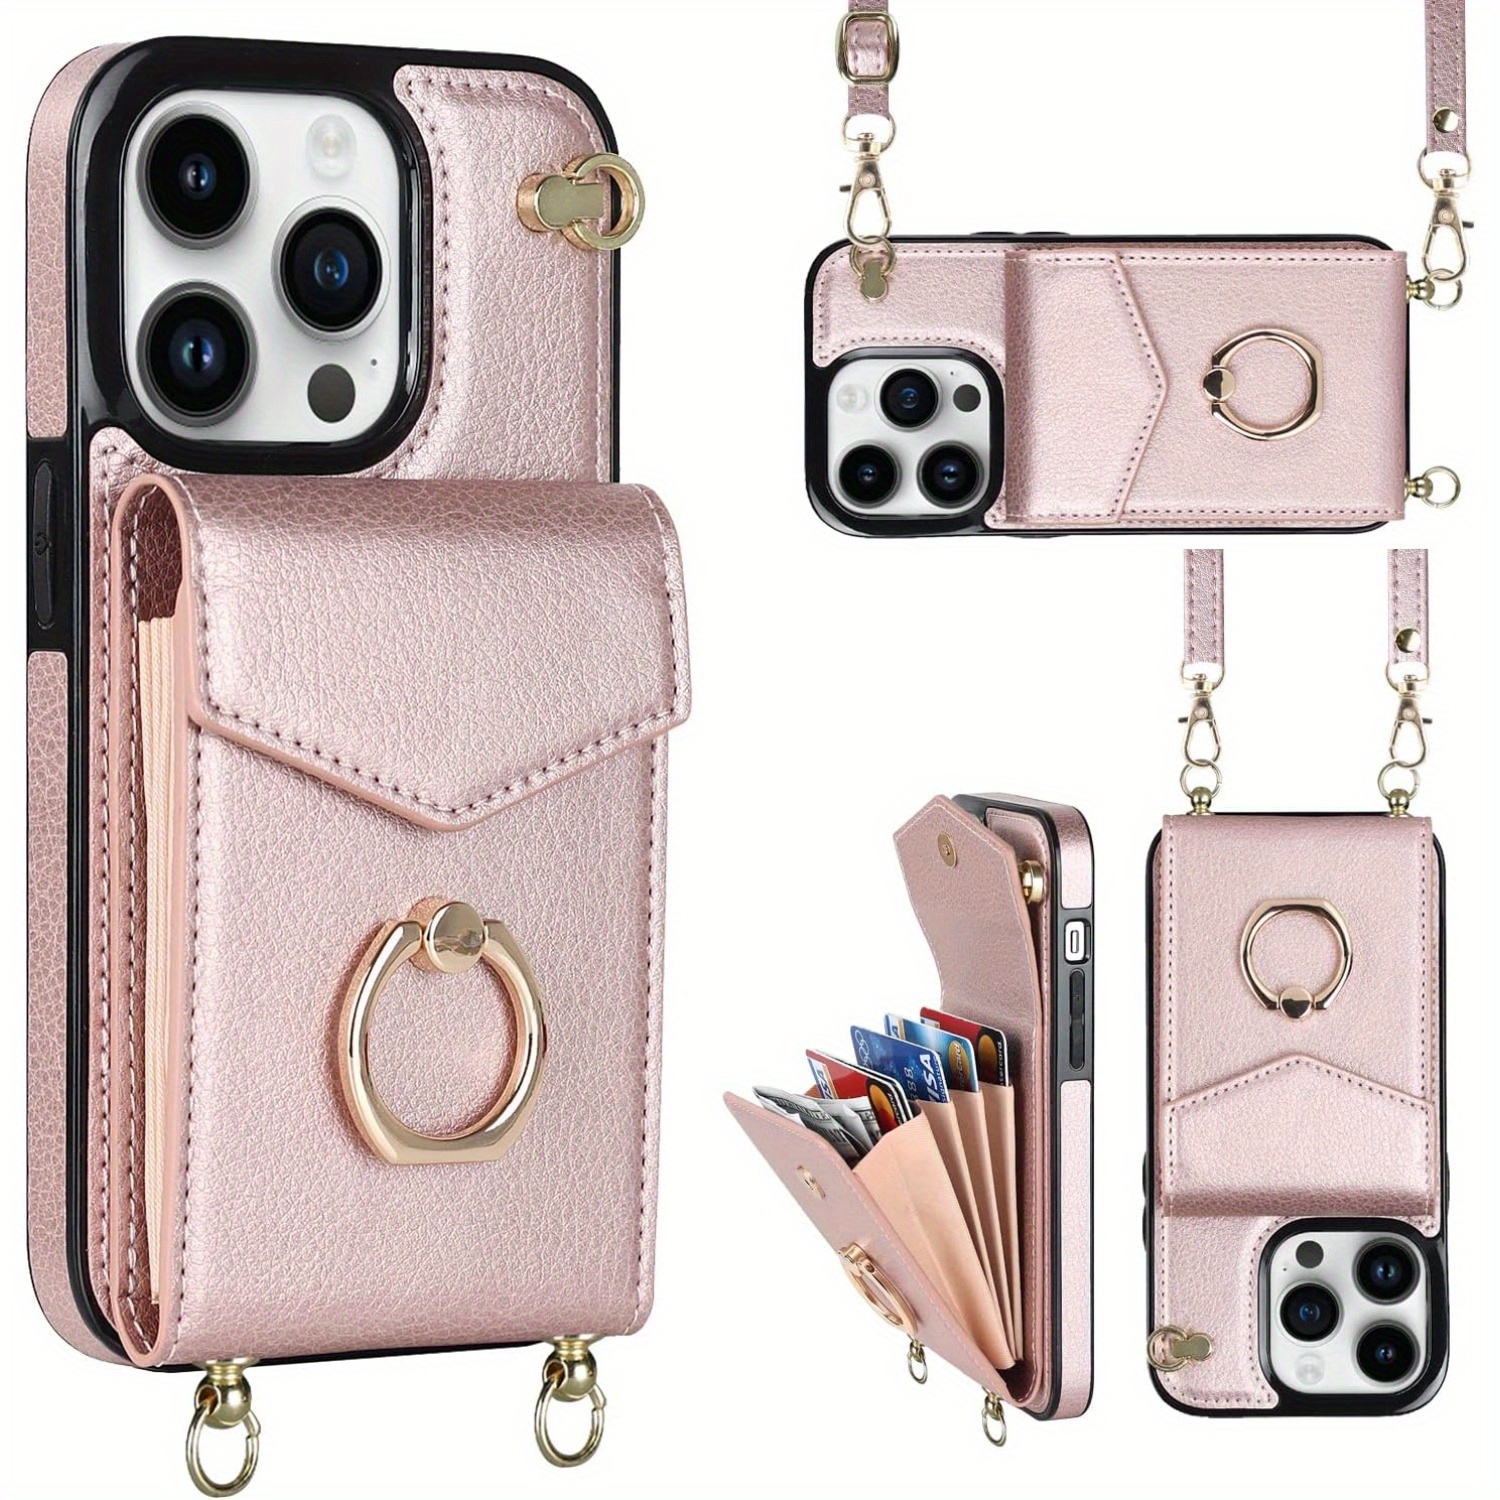 

For Iphone 11/11pro/11promax, Minimalist Wallet Case With Ring Kickstand And Shoulder Strap, Shockproof Stylish Protective Cover For Iphone